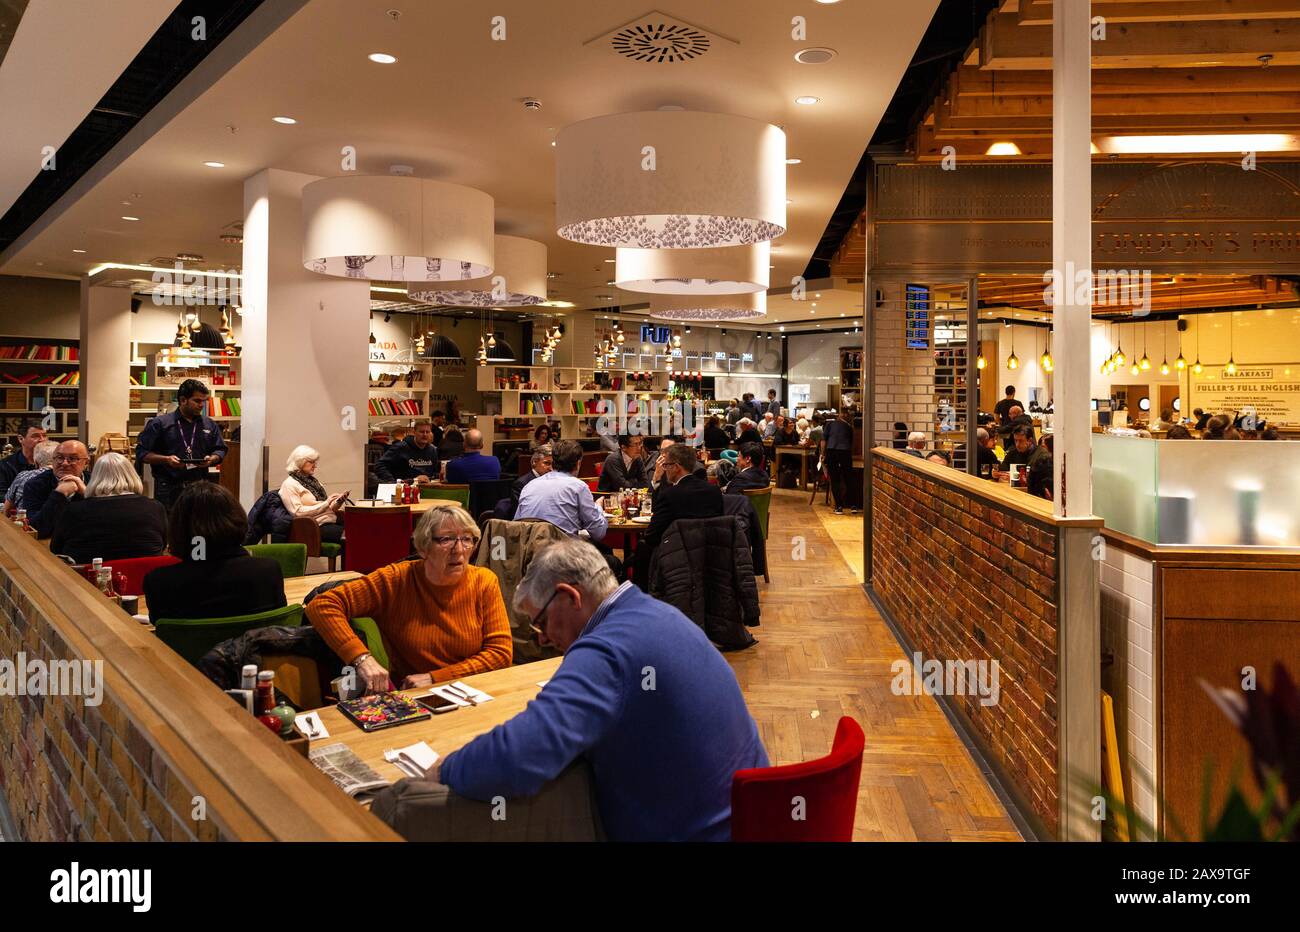 The busy interior of a pub-restaurant inside Stansted airport, England, UK. Stock Photo